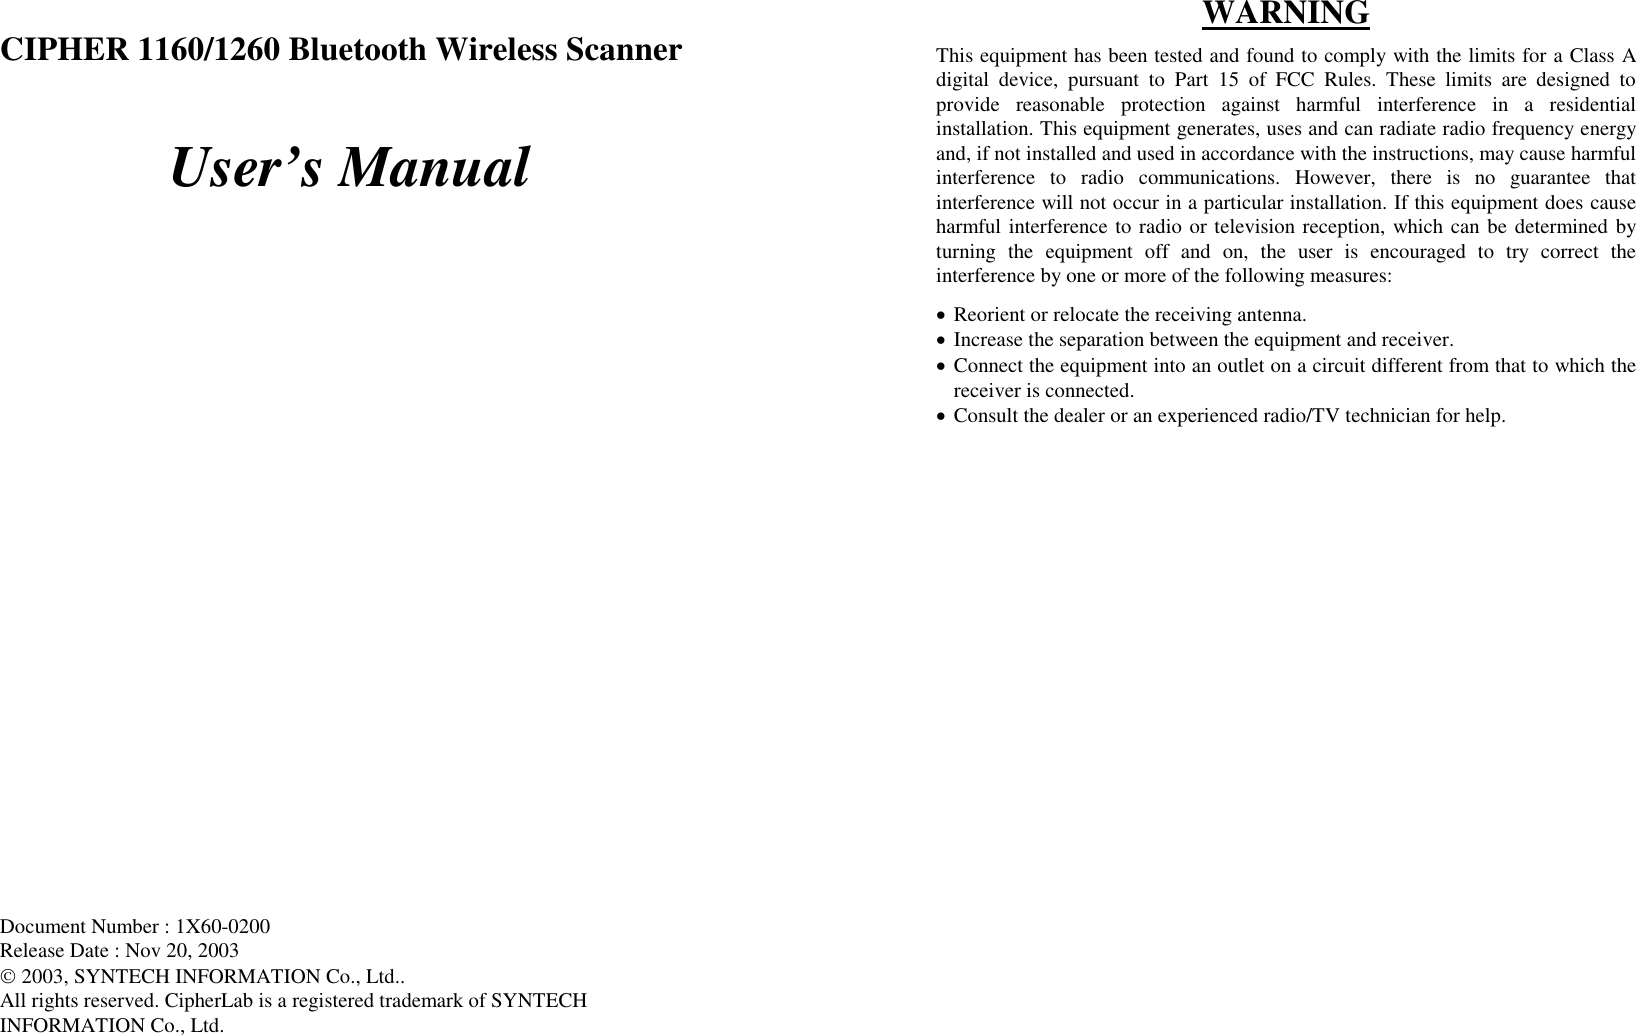  CIPHER 1160/1260 Bluetooth Wireless Scanner  User’s Manual                             Document Number : 1X60-0200 Release Date : Nov 20, 2003  2003, SYNTECH INFORMATION Co., Ltd.. All rights reserved. CipherLab is a registered trademark of SYNTECH INFORMATION Co., Ltd.  WARNING This equipment has been tested and found to comply with the limits for a Class A digital device, pursuant to Part 15 of FCC Rules. These limits are designed to provide reasonable protection against harmful interference in a residential installation. This equipment generates, uses and can radiate radio frequency energy and, if not installed and used in accordance with the instructions, may cause harmful interference to radio communications. However, there is no guarantee that interference will not occur in a particular installation. If this equipment does cause harmful interference to radio or television reception, which can be determined by turning the equipment off and on, the user is encouraged to try correct the interference by one or more of the following measures: •  Reorient or relocate the receiving antenna. •  Increase the separation between the equipment and receiver. •  Connect the equipment into an outlet on a circuit different from that to which the receiver is connected. •  Consult the dealer or an experienced radio/TV technician for help. 